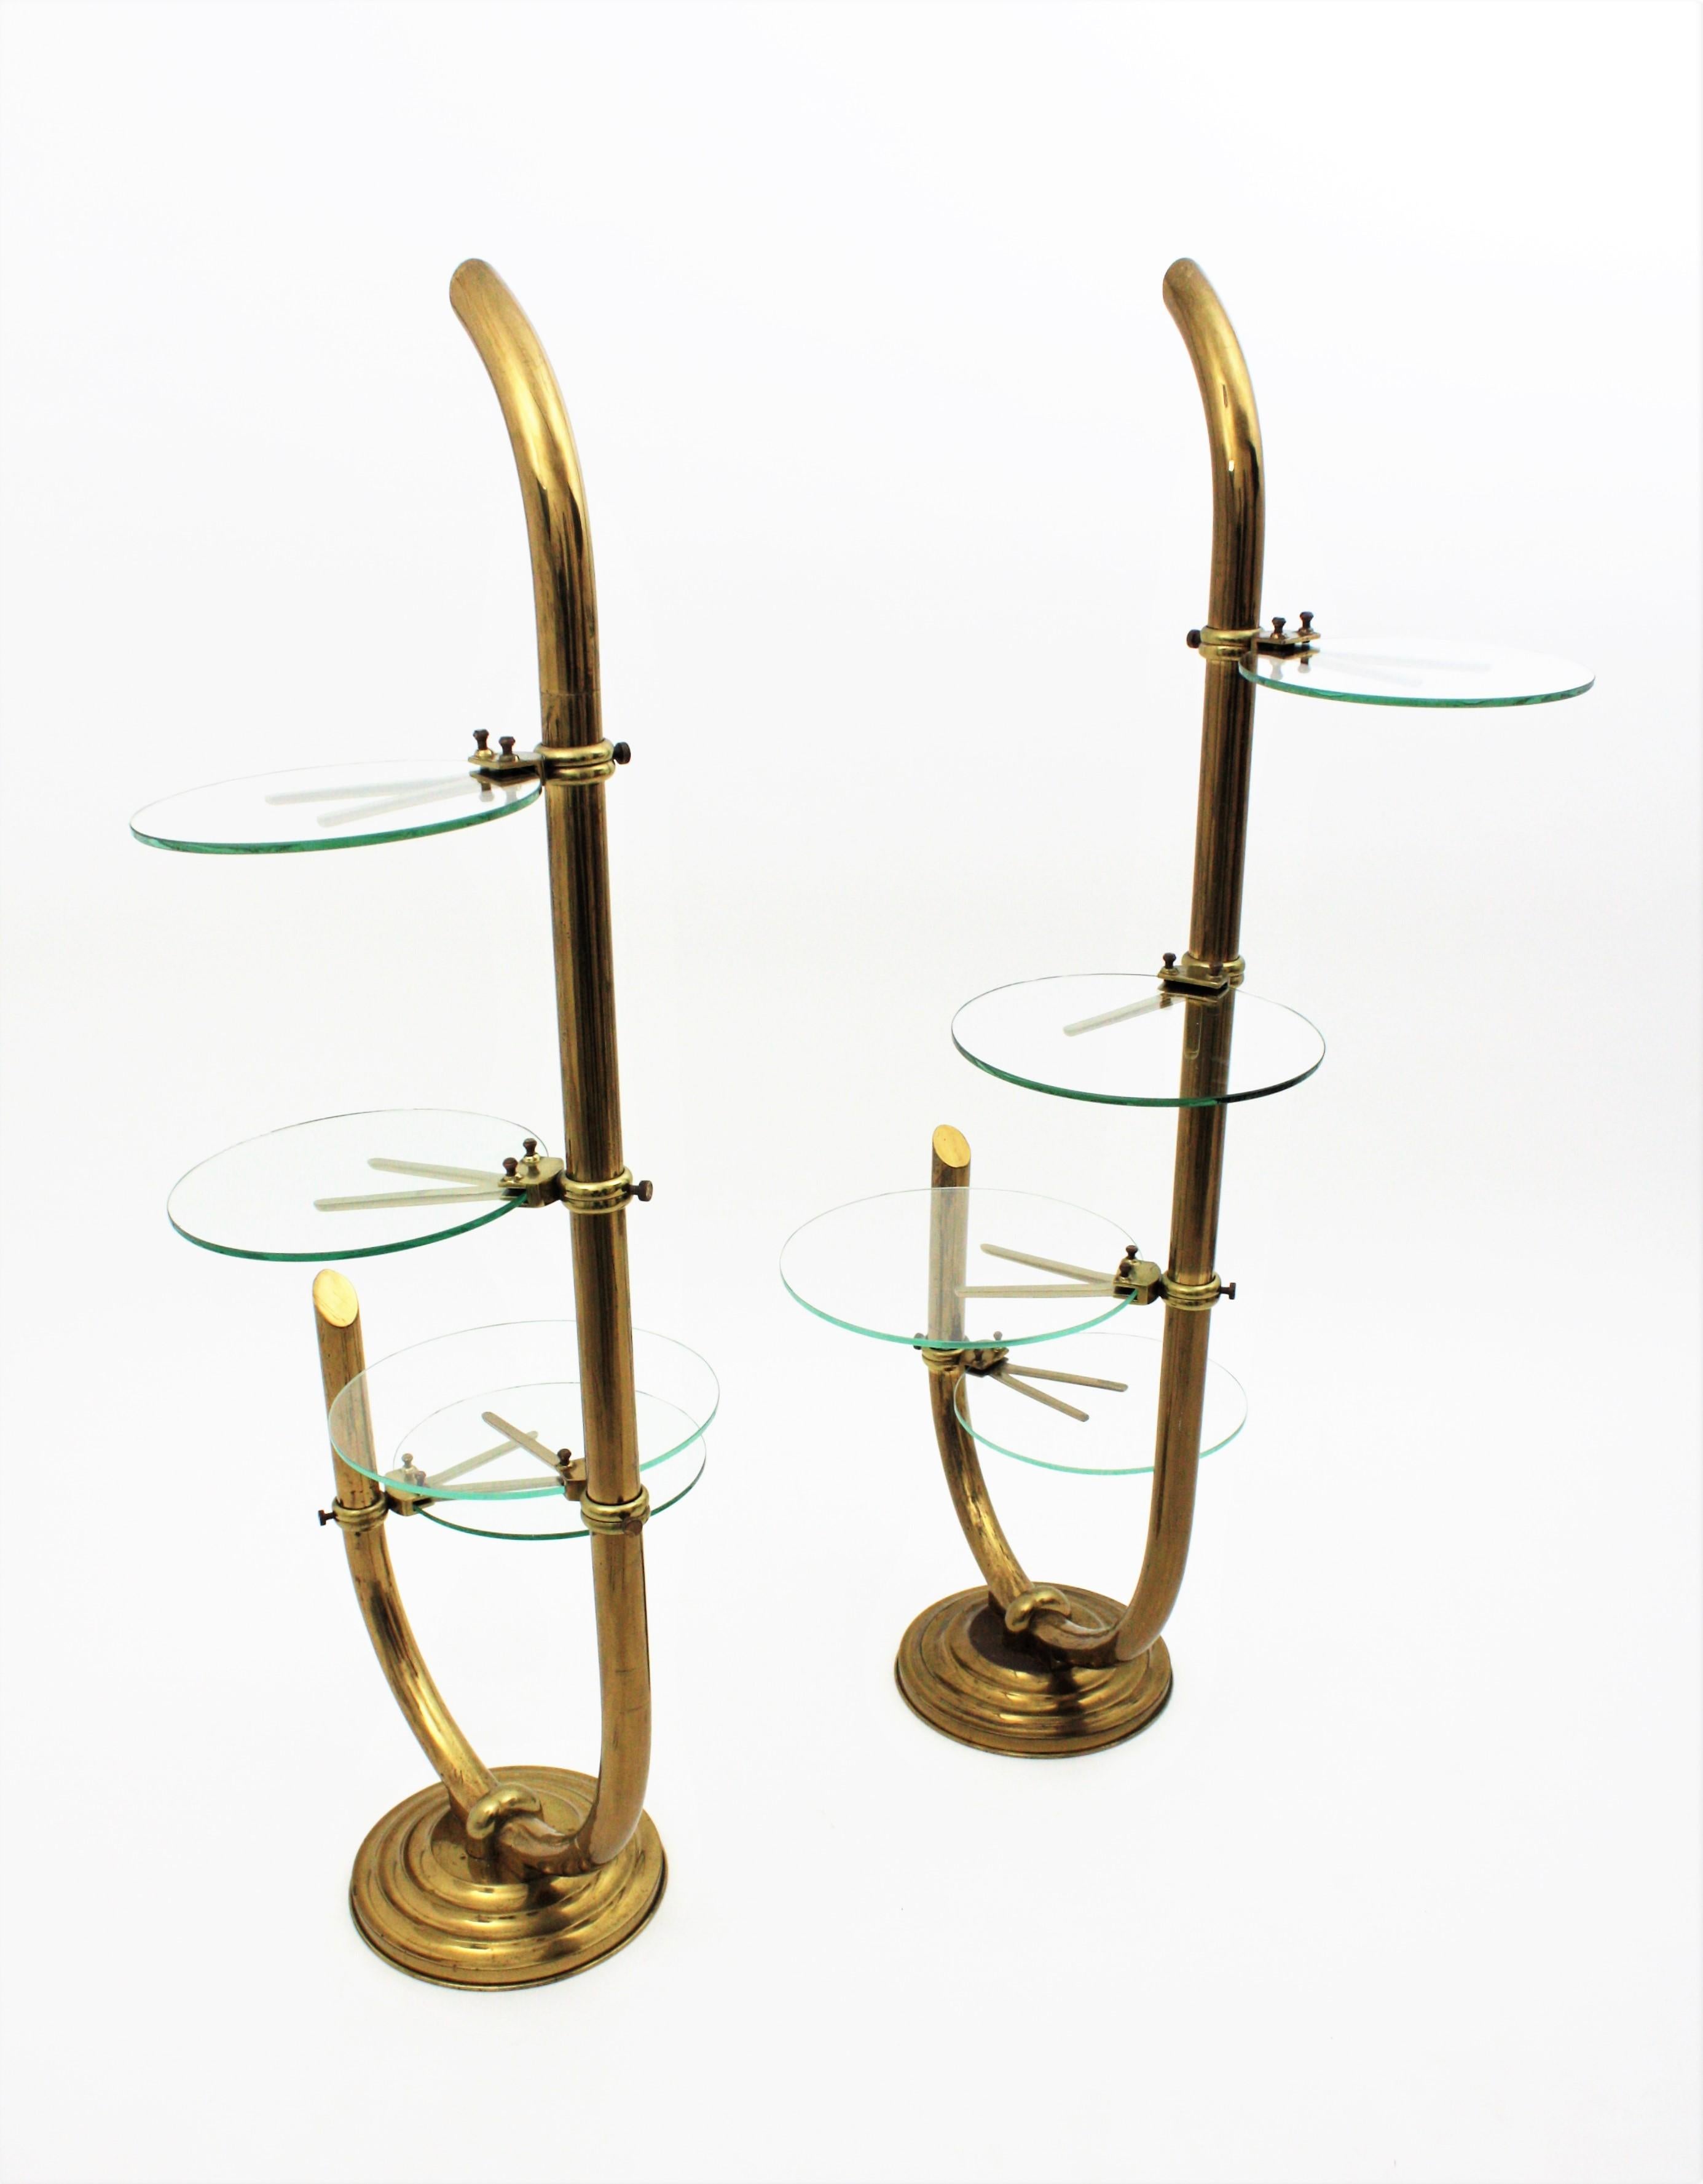 Art Deco Brass Floor Shop Display Stands / Swivel Etageres with Shelves in Glass 8